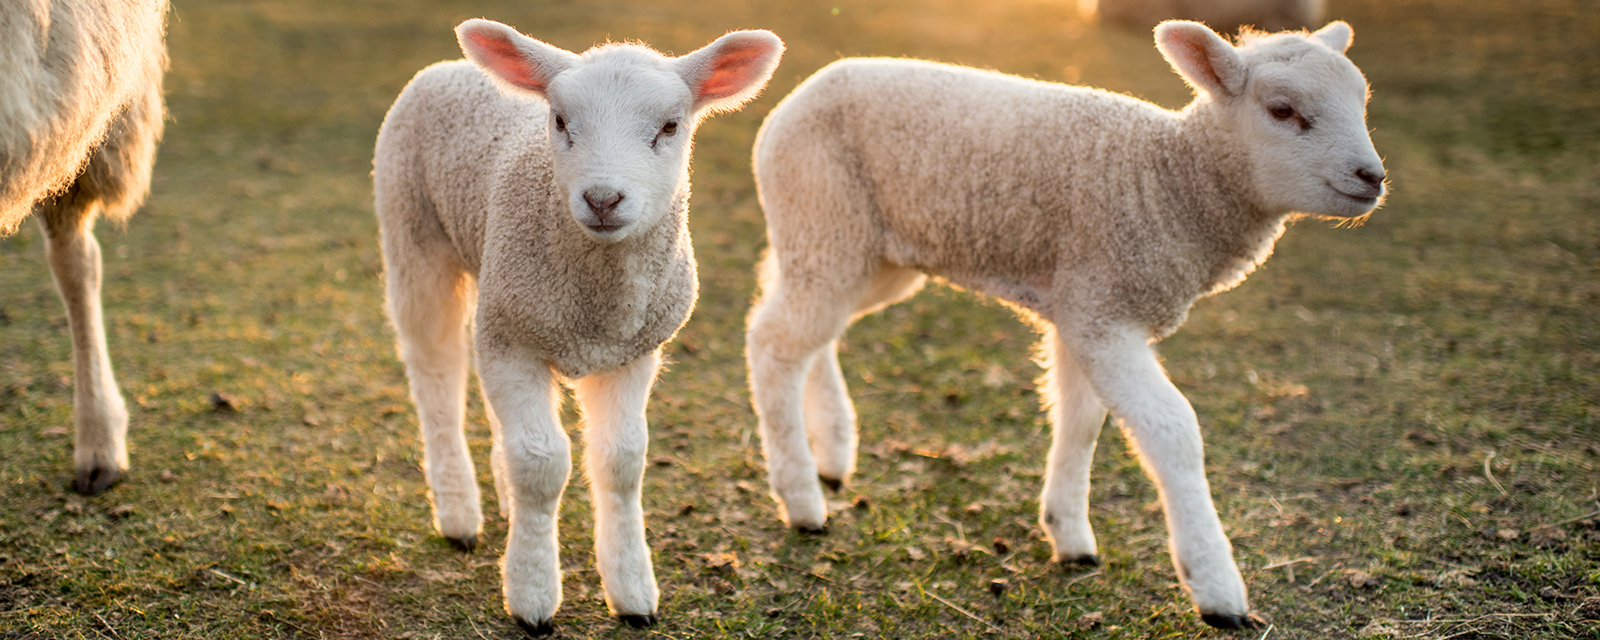 two lambs in a sunny pasture